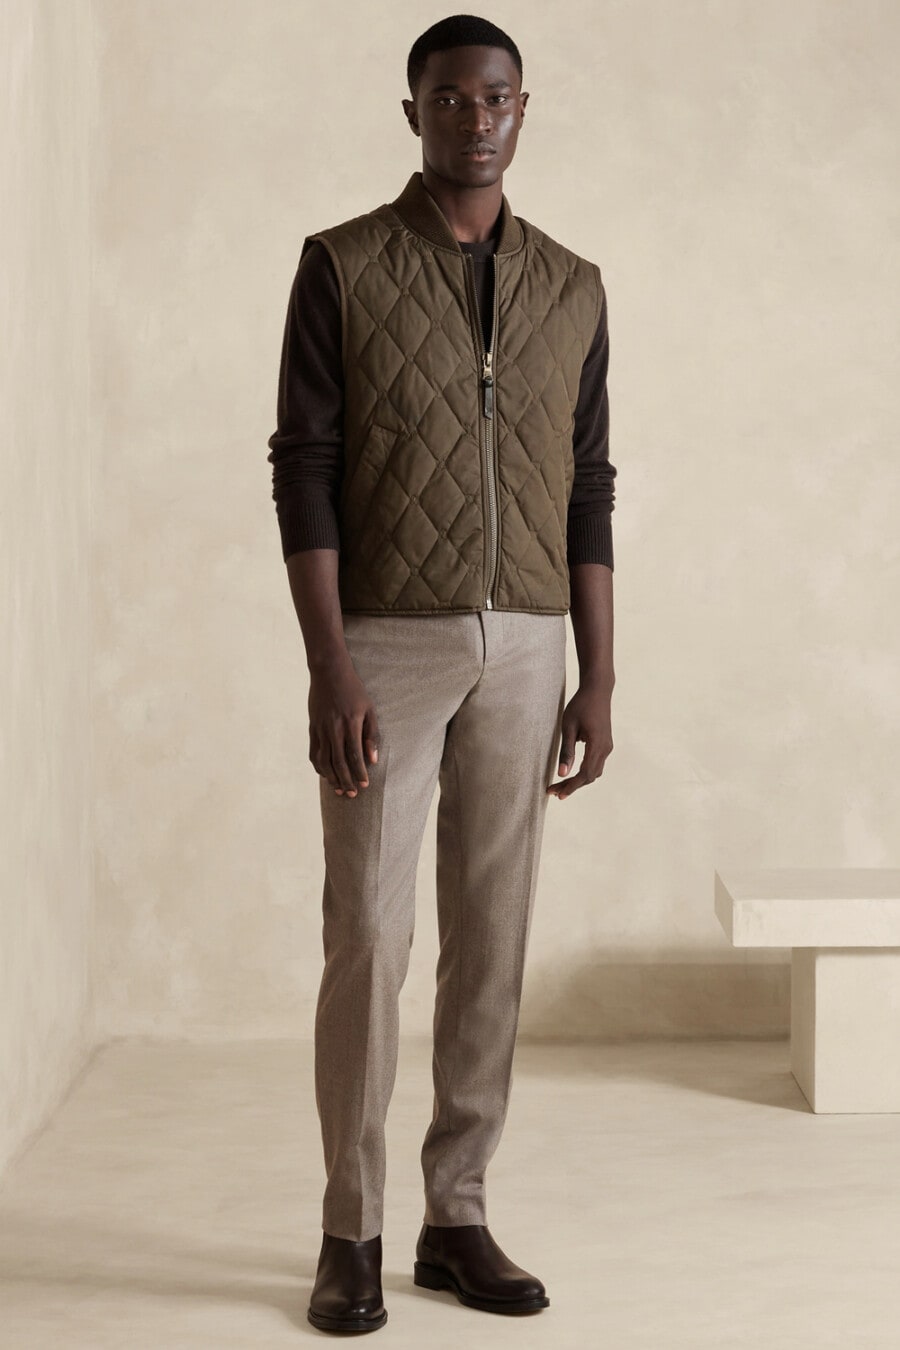 Men's grey chinos, long-sleeve black top, green padded vest and brown leather Chelsea boots outfit